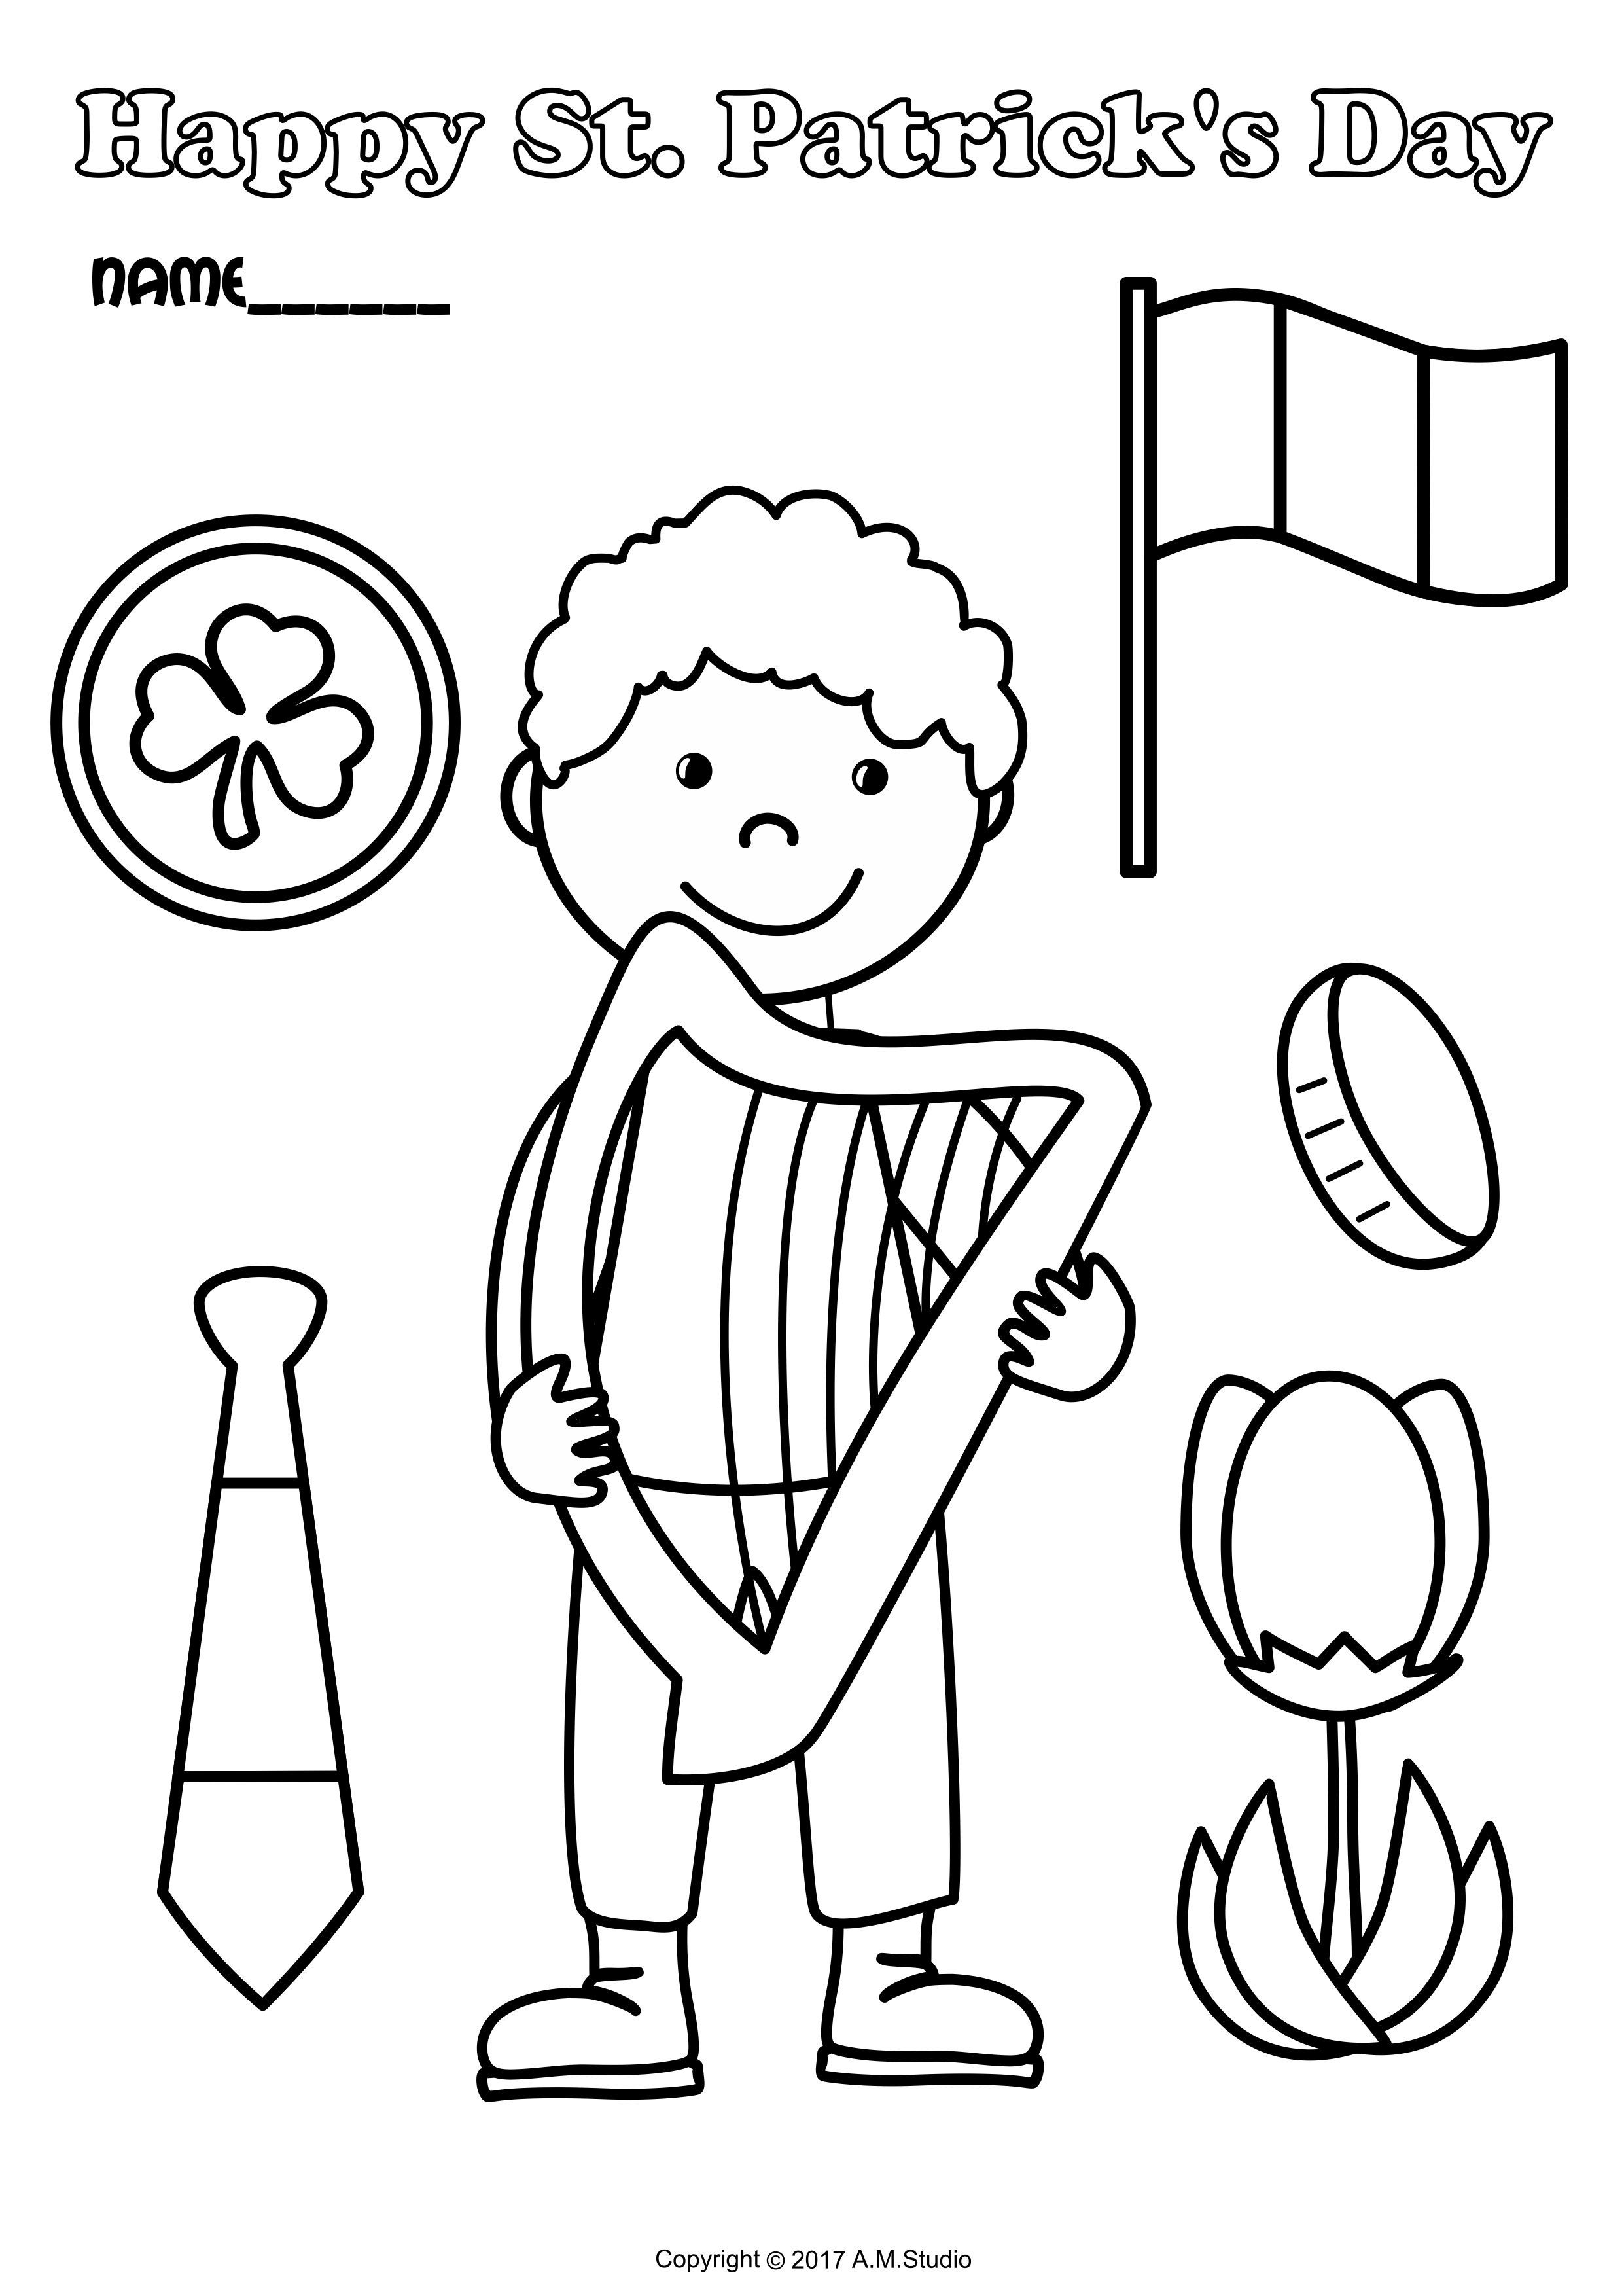 St. Patrick`s Day Printable Coloring Pages for Kids (img # 2)